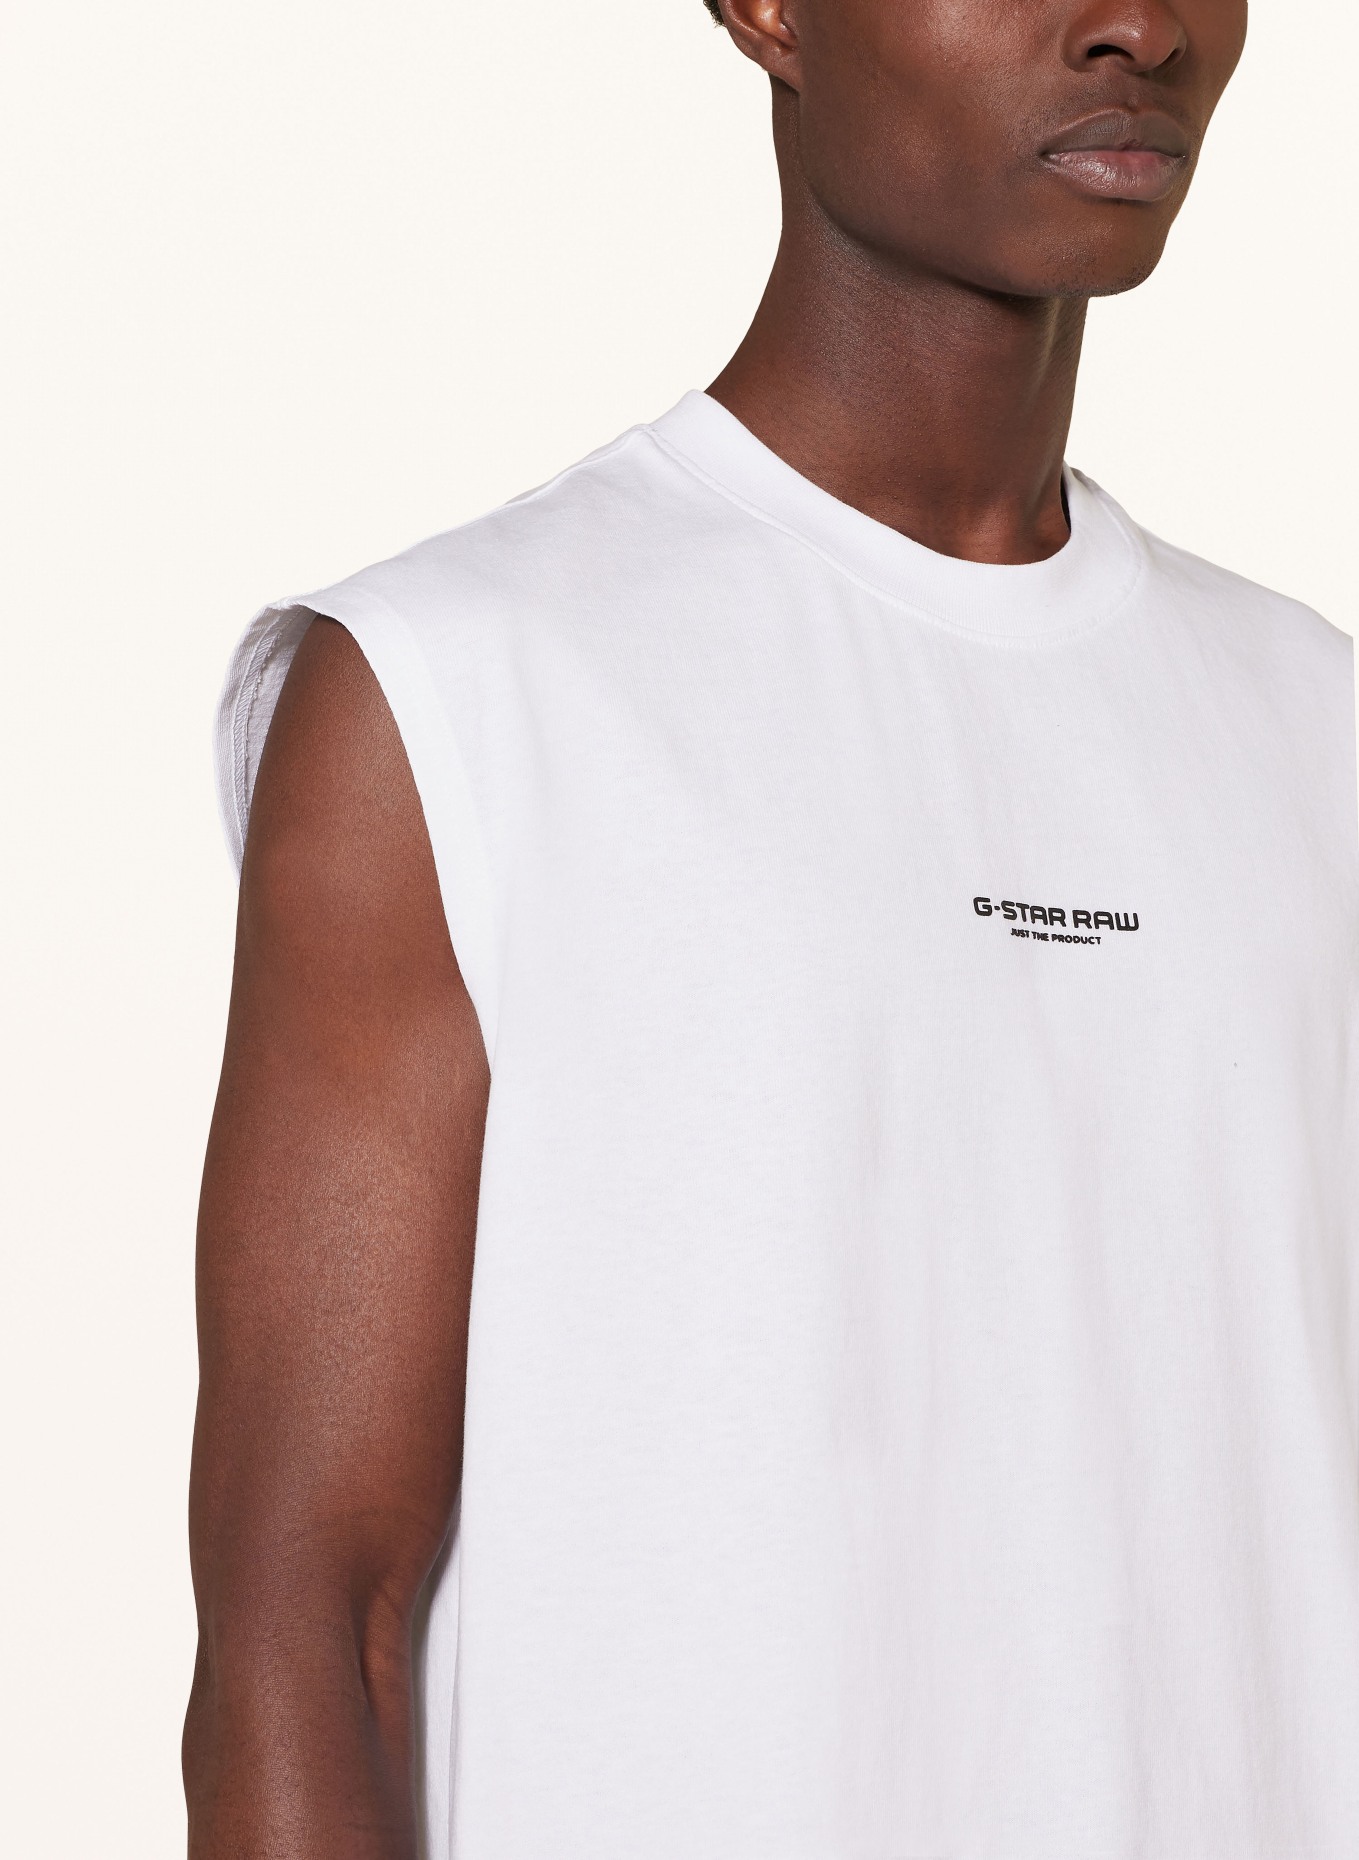 G-Star RAW Tank top, Color: WHITE (Image 4)